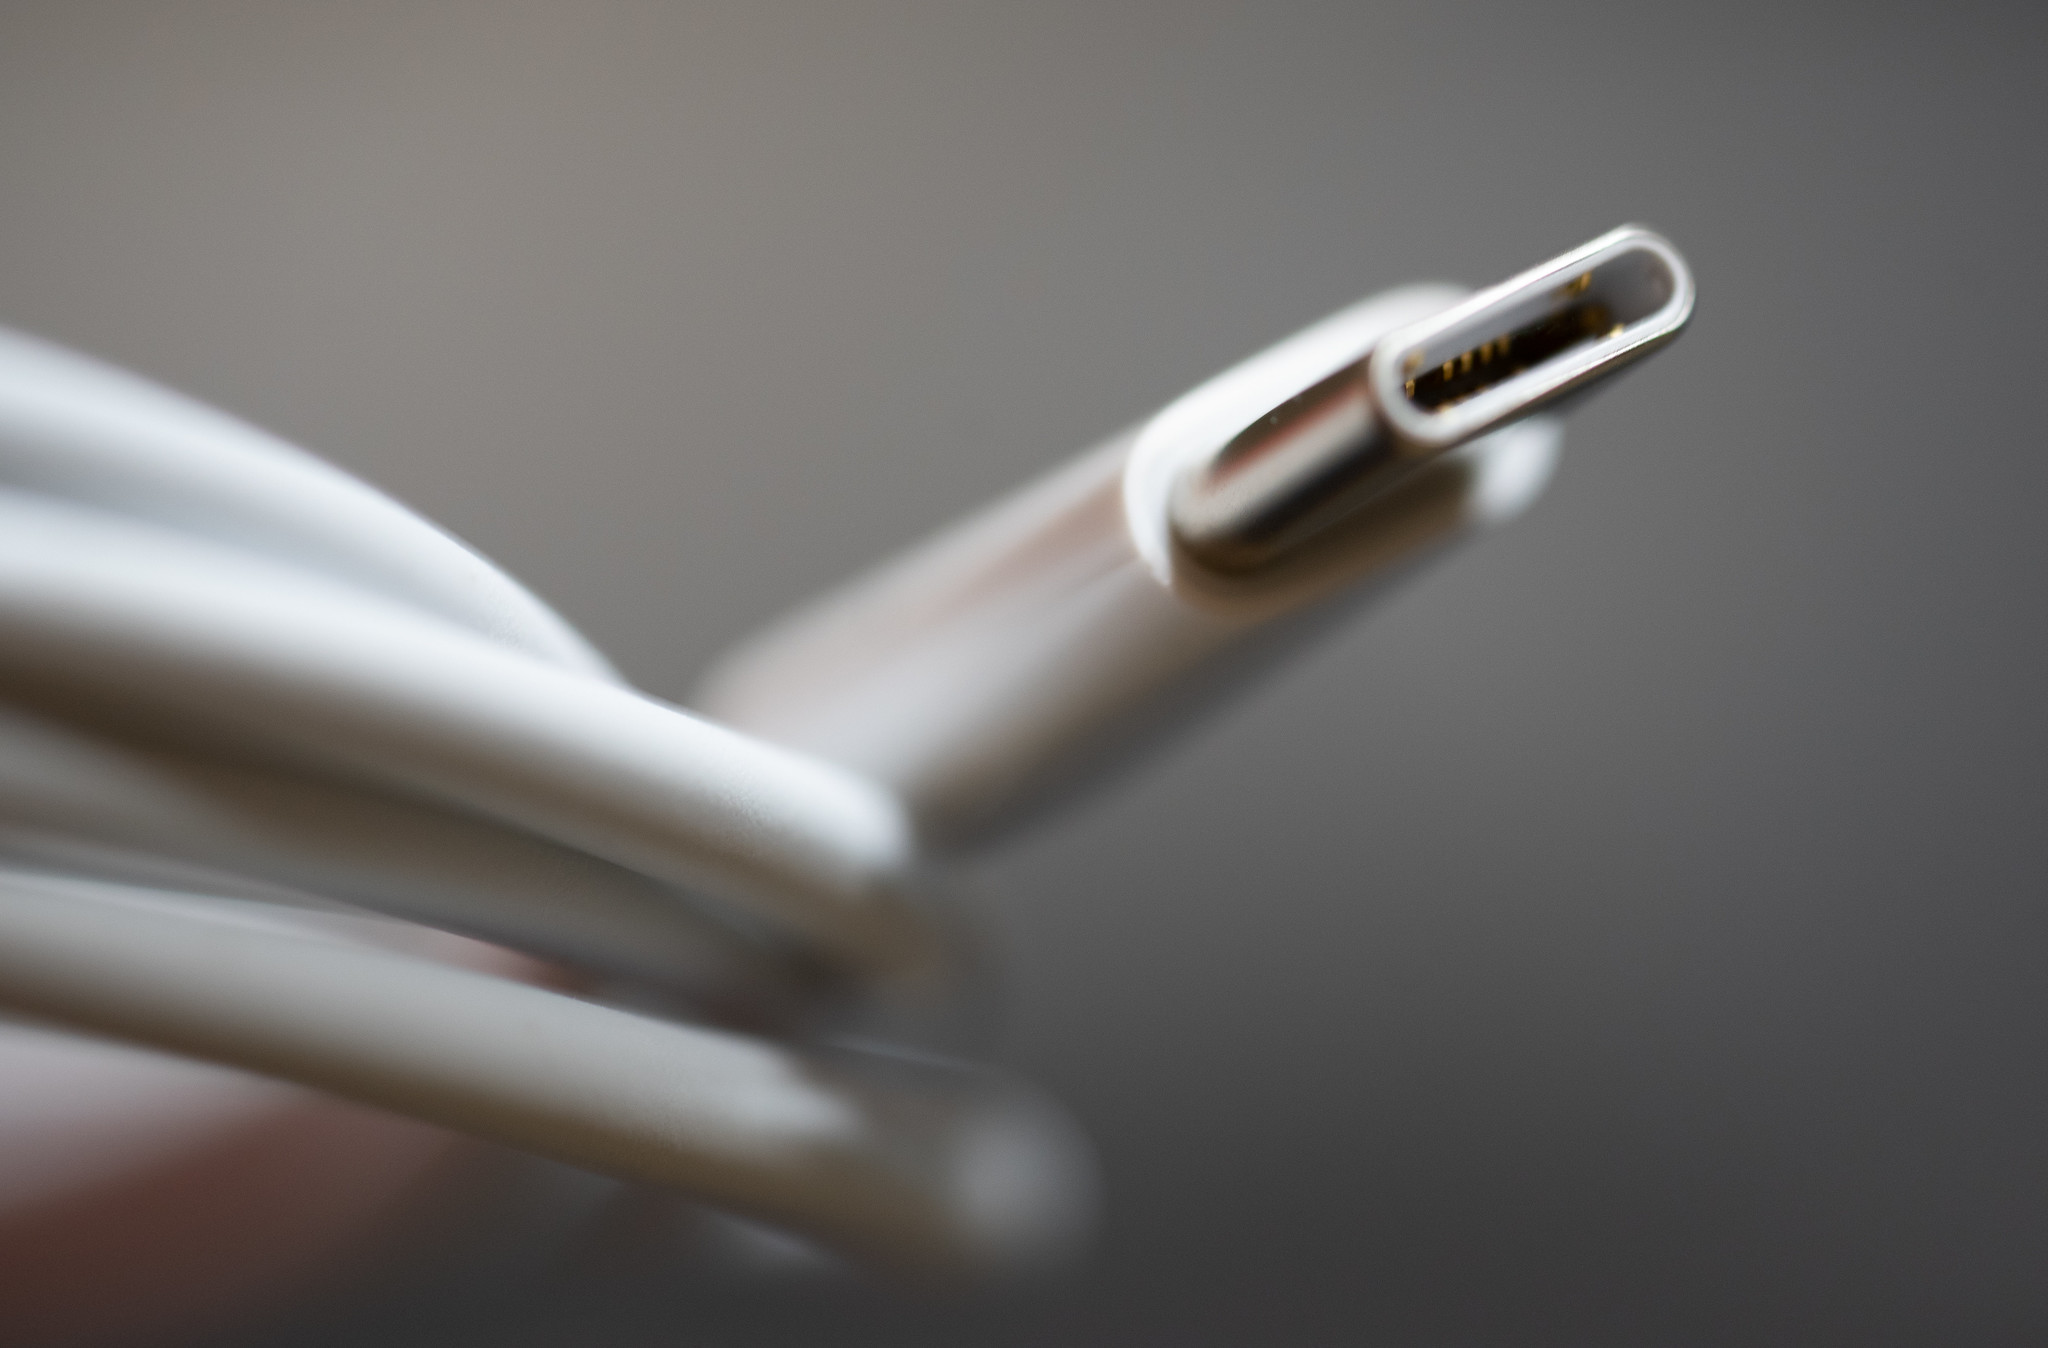 New USB-C Type 2.1 standard offers up to 240 W power delivery | Ars Technica